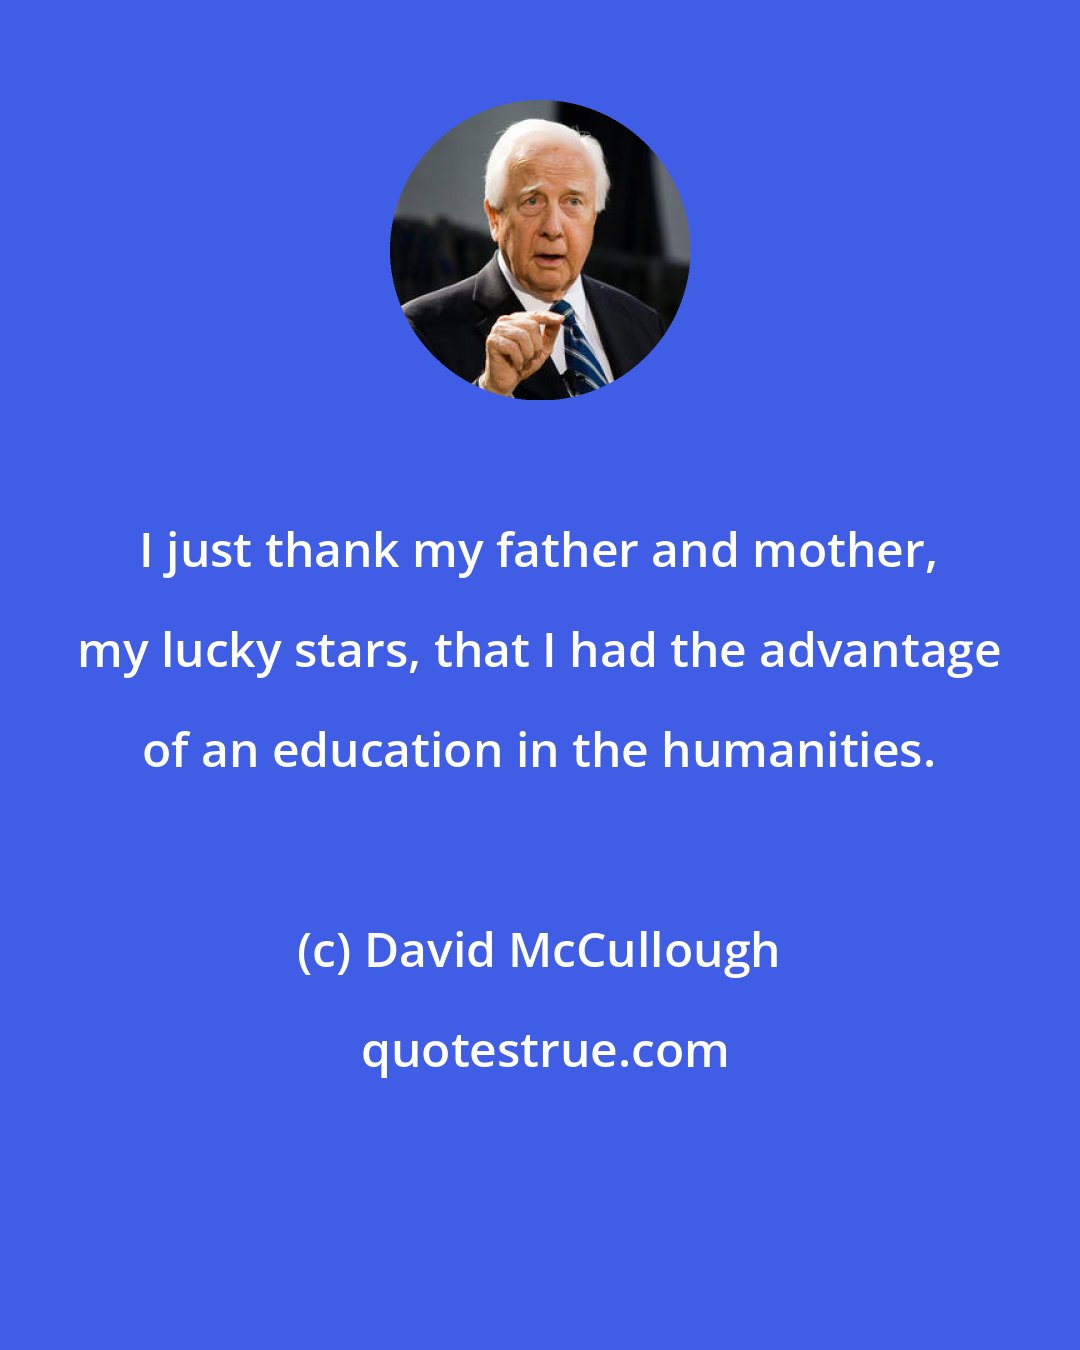 David McCullough: I just thank my father and mother, my lucky stars, that I had the advantage of an education in the humanities.